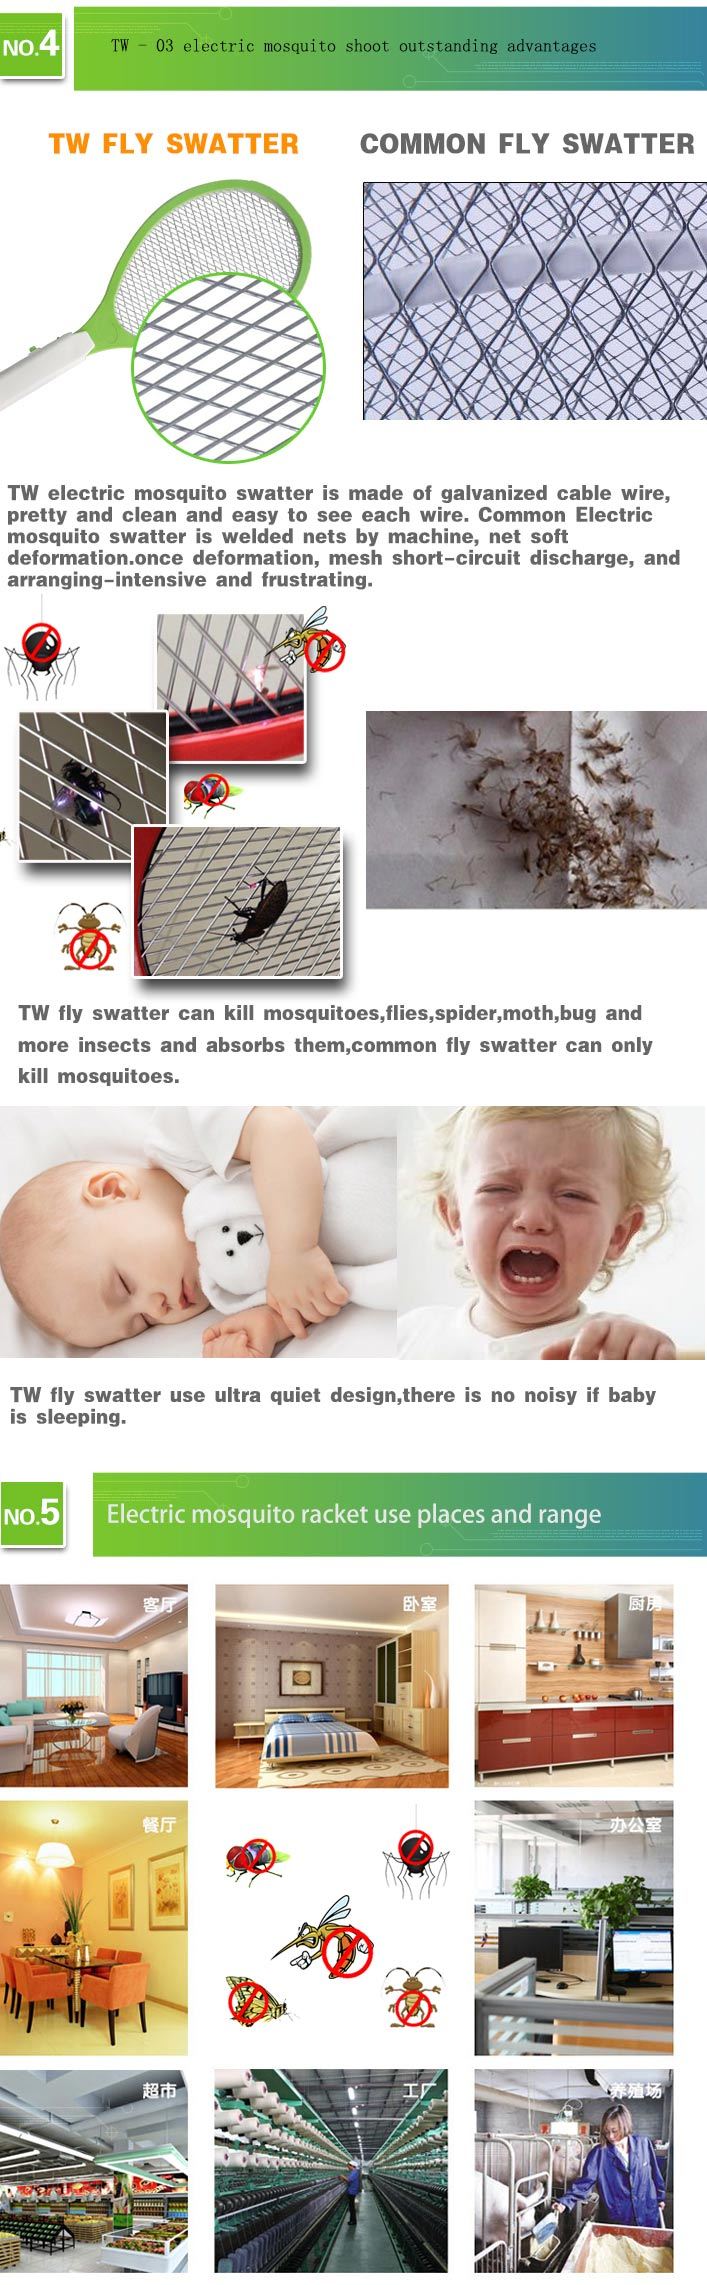 High Quality Electronic Mosquito Repeller with CE&RoHS (TW-03)